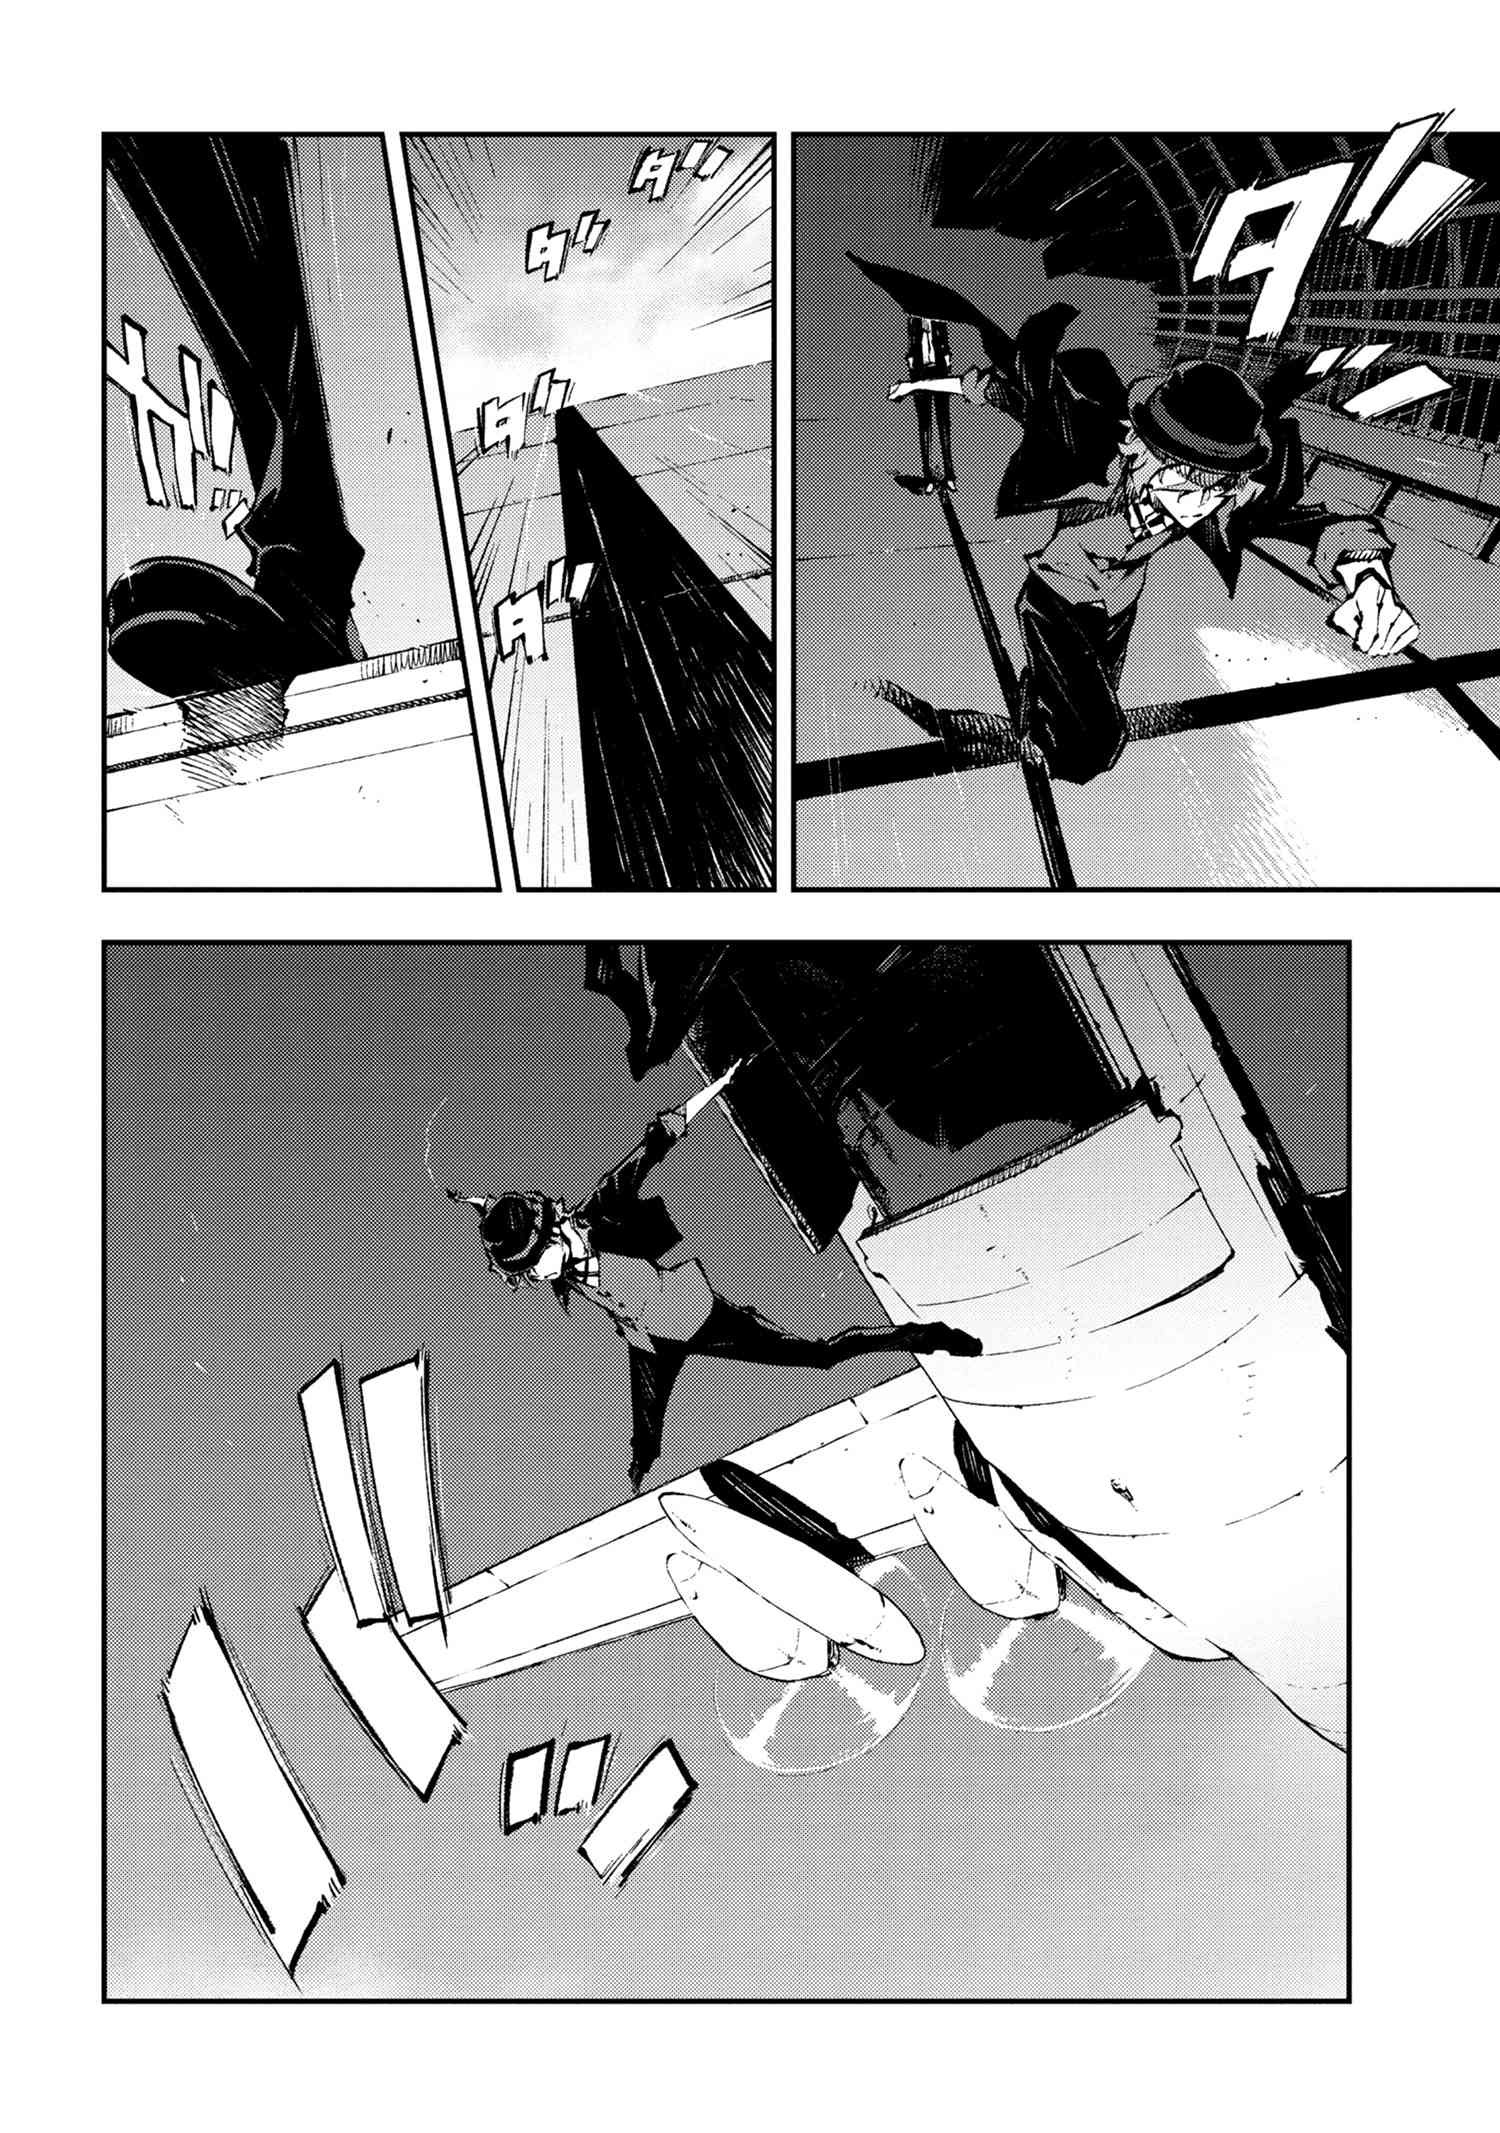 Bungou Stray Dogs: Dead Apple - Chapter 13-1 - Page 13